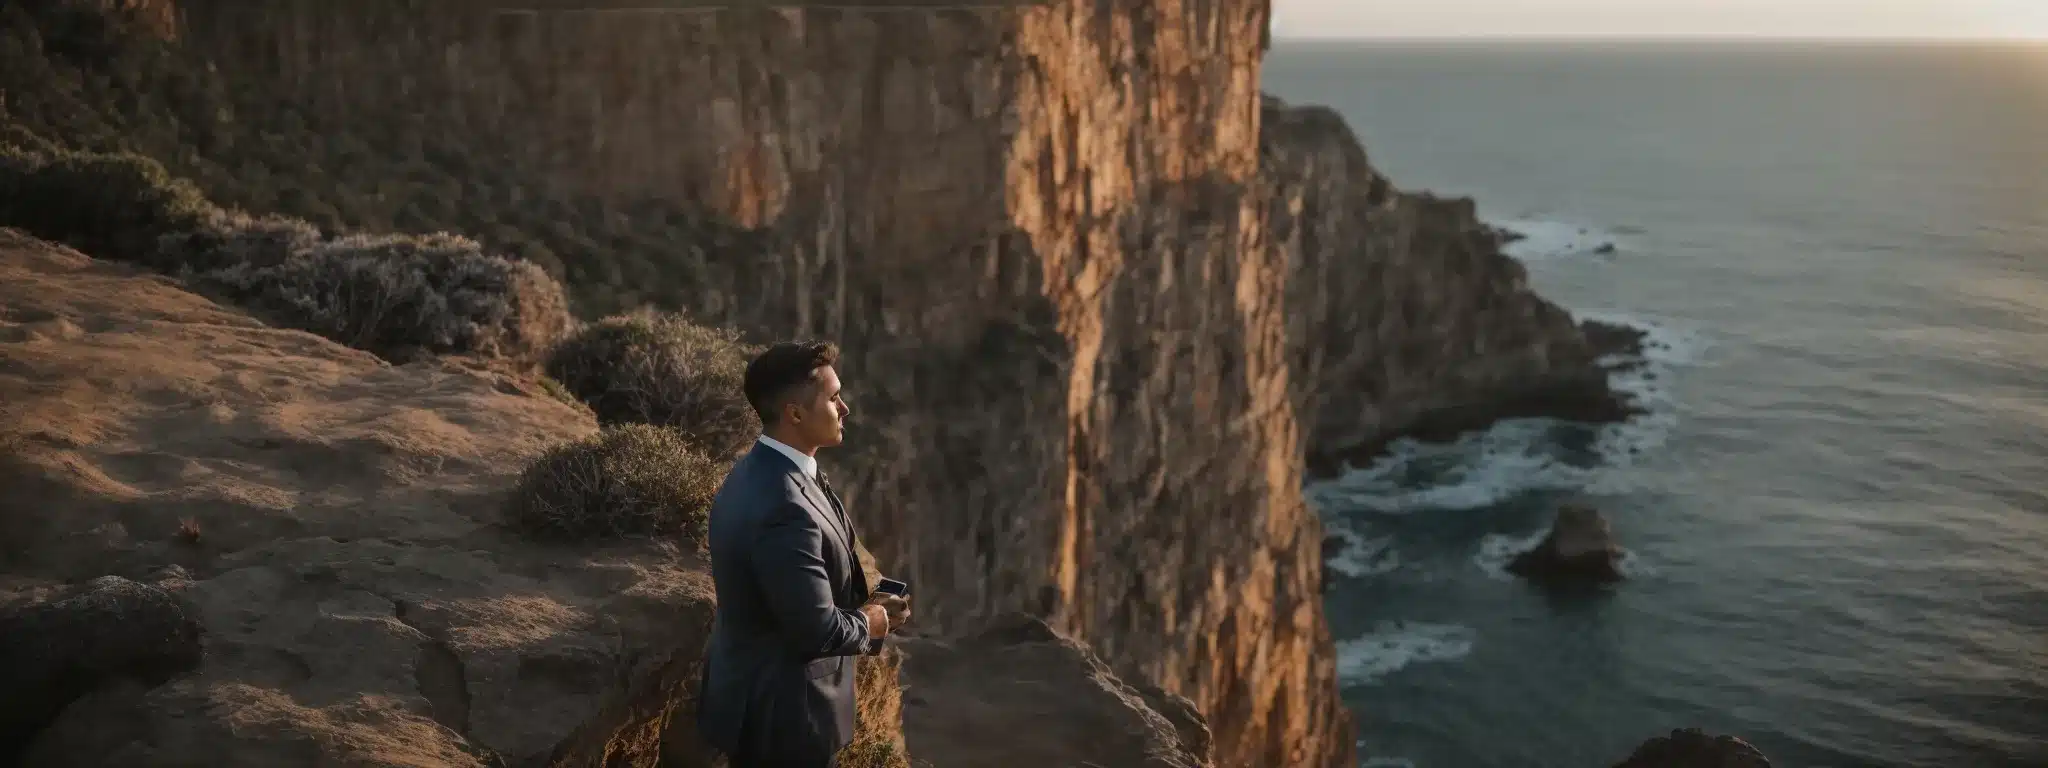 A Businessman With A Compass Standing On A Cliff Looking Out Over A Vast Ocean At Sunrise.